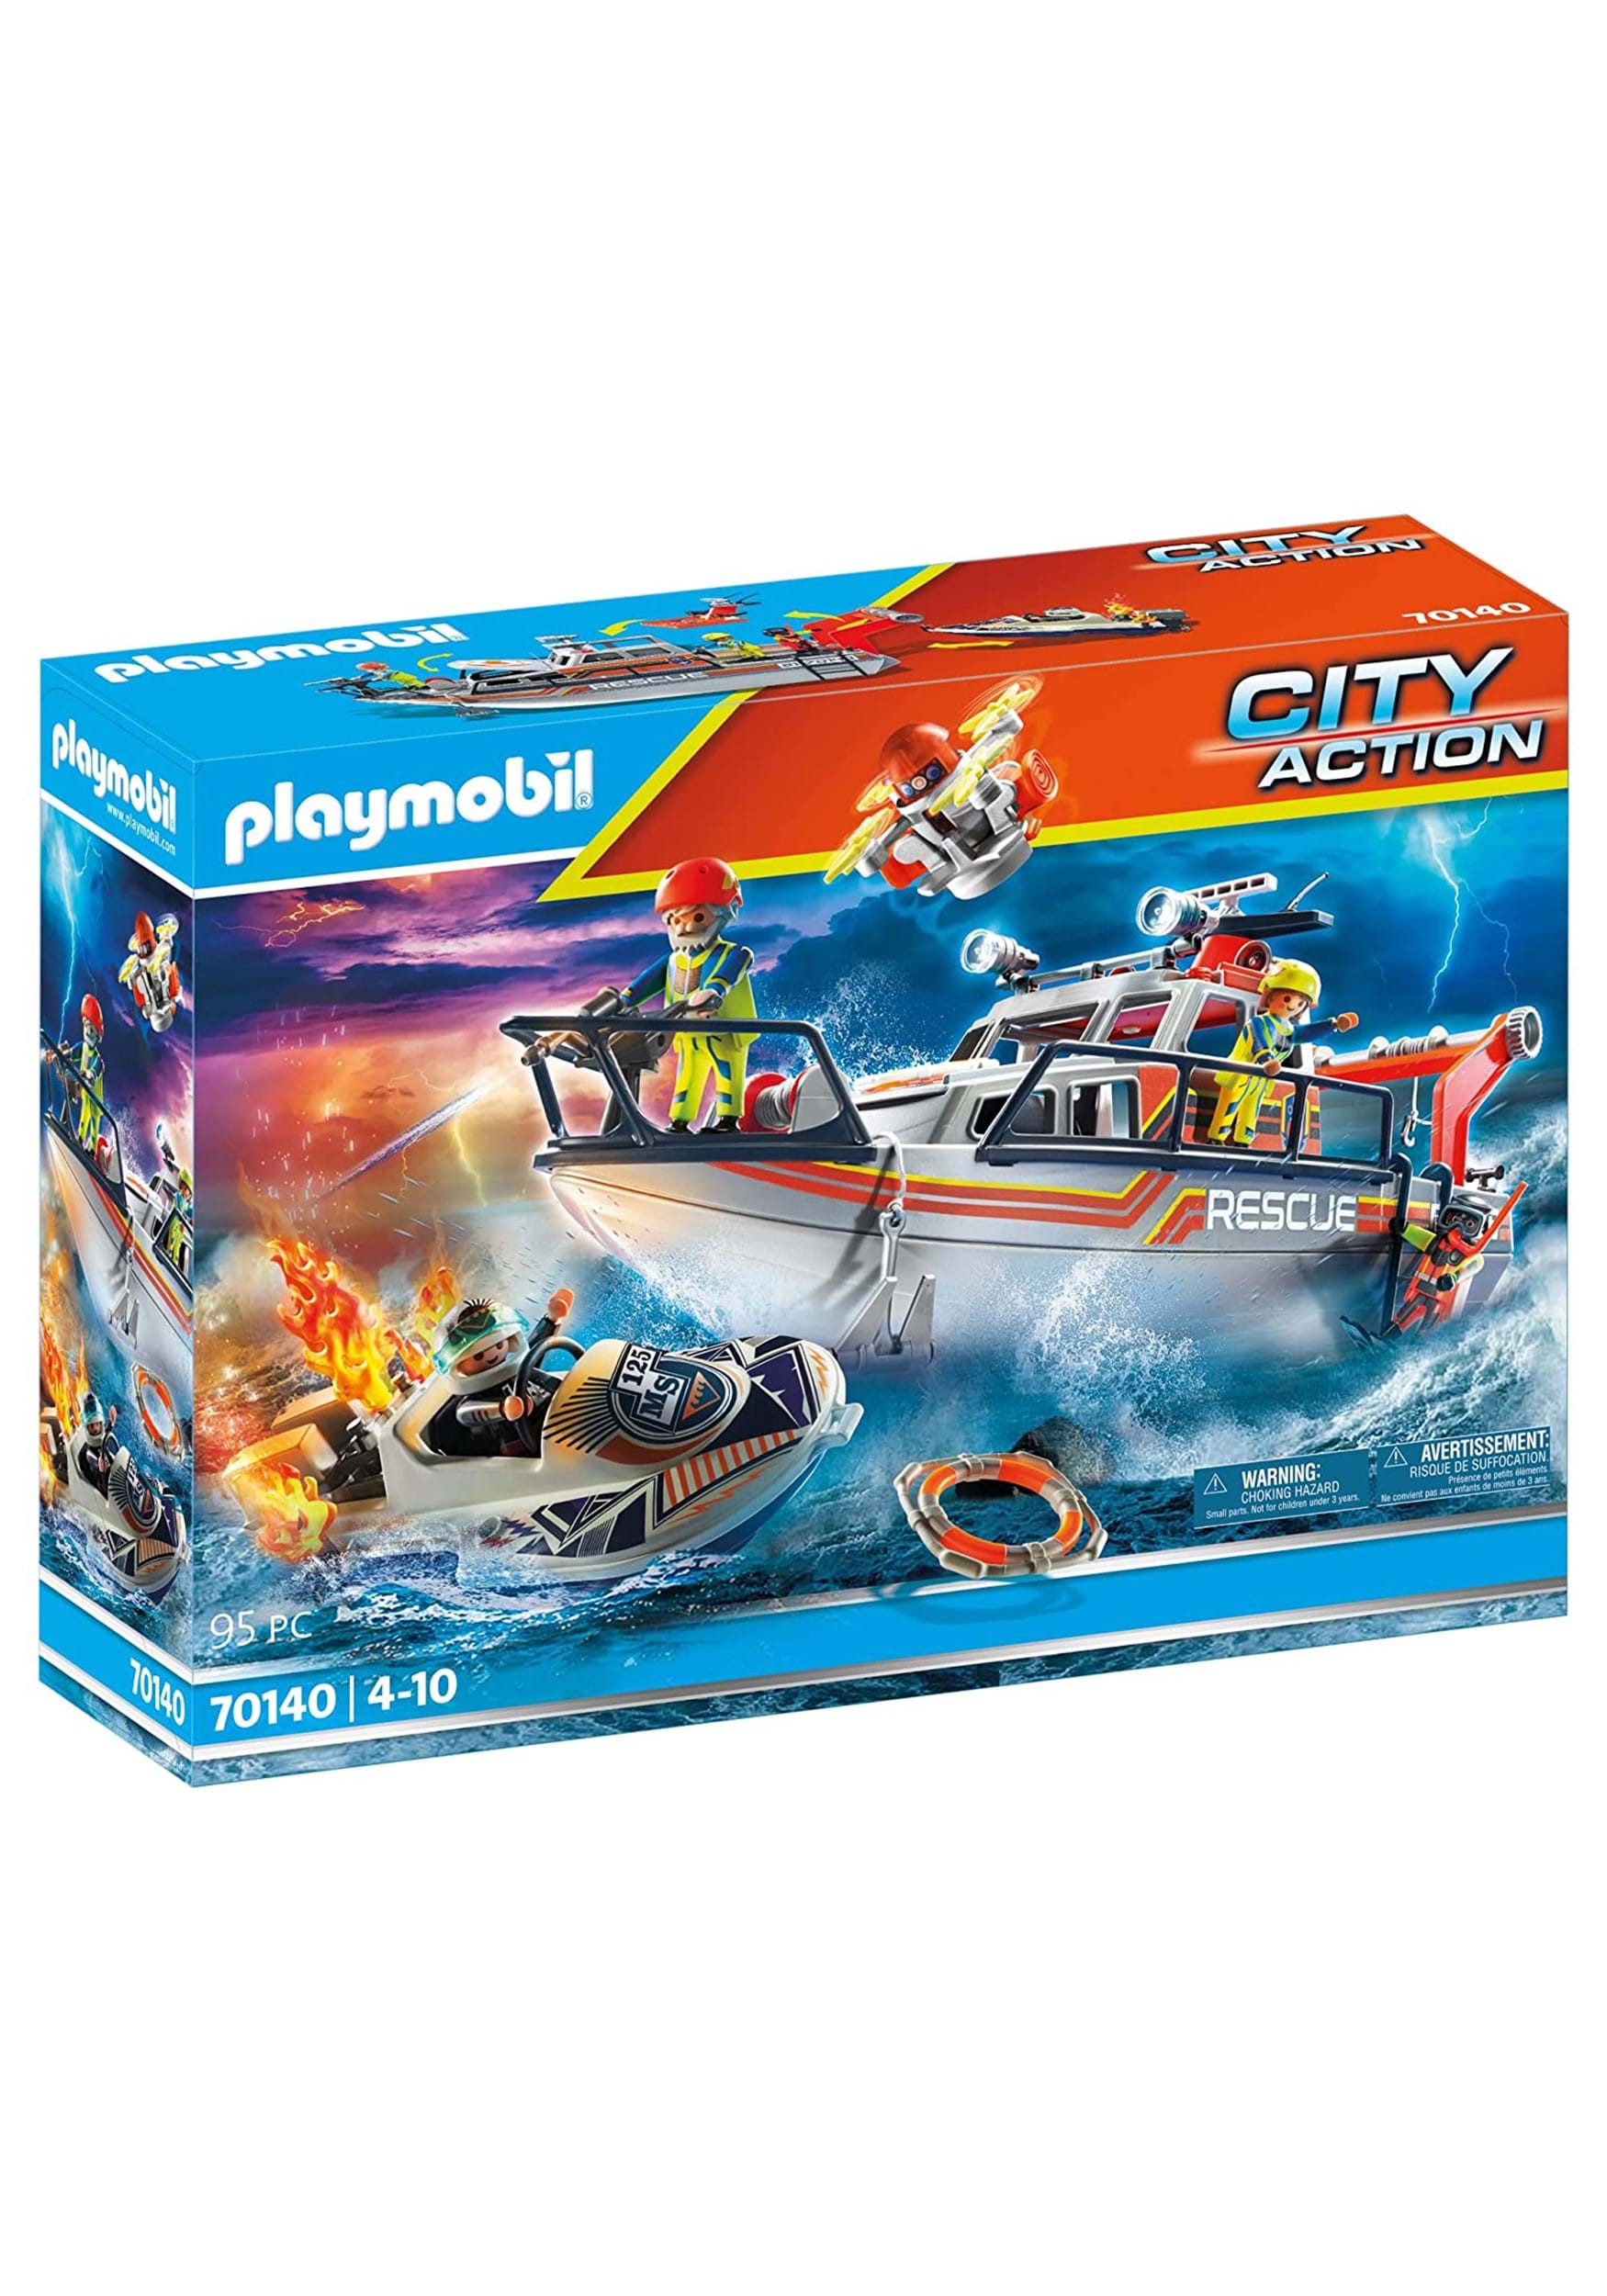 Fire Rescue w/ Personal Watercraft From Playmobil